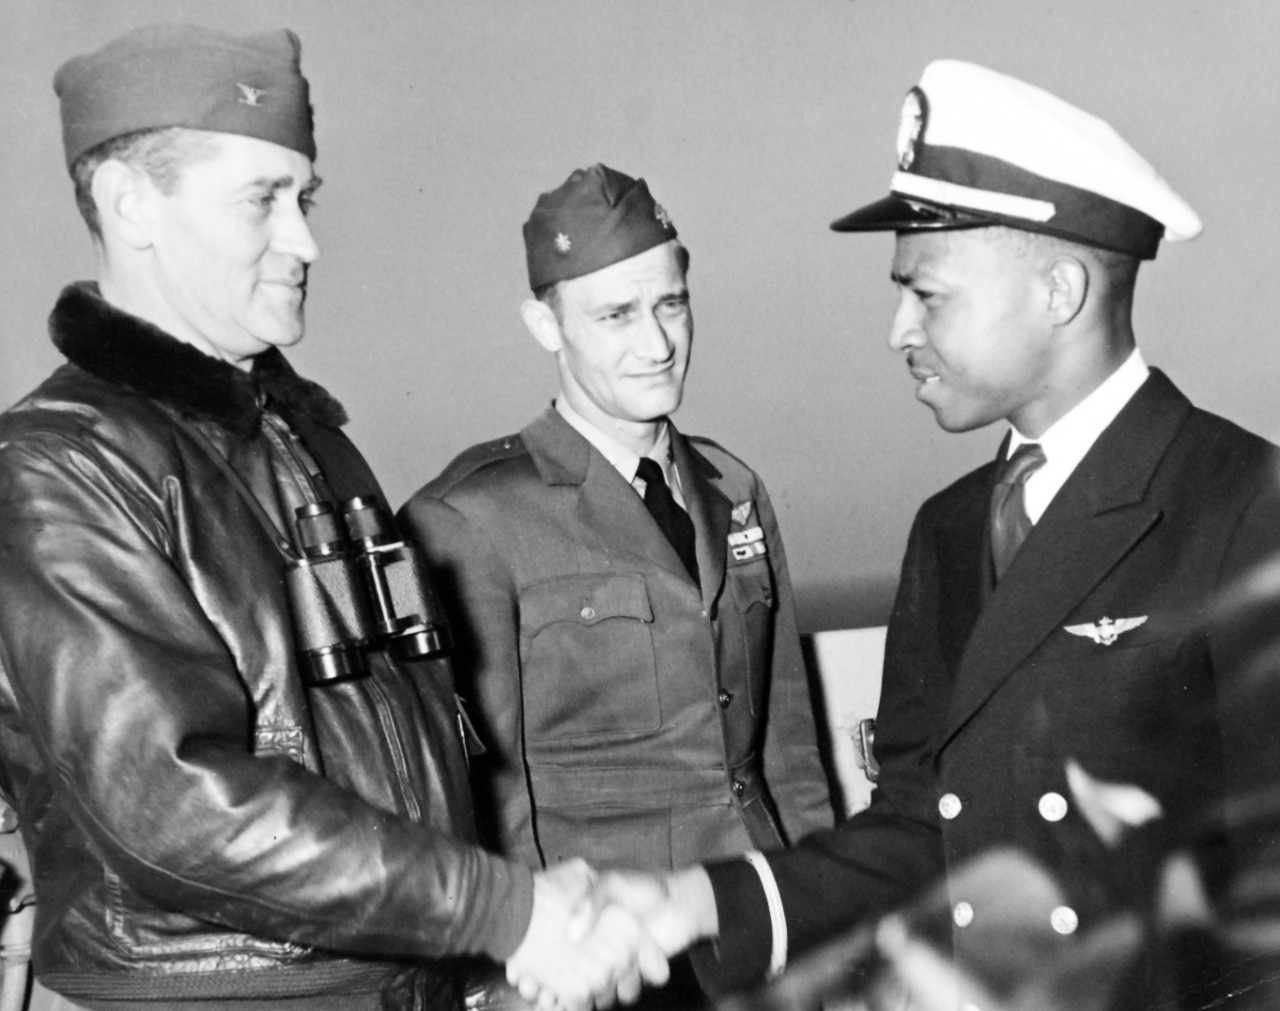 80-G-404869:   Ensign Jesse L. Brown, USN, April 1949.  First African American Aviator Ensign Jesse L. Brown shaking hands with Captain W.L. Erdman, Commanding Officer of USS Leyte (CV-32).  Shown, L to R: Captain W.L. Erdman, Lieutenant Commander E.D. Williams, CO of VF-32, and Ensign Brown.  Official U.S. Navy Photograph, now in the collections of the National Archives.  